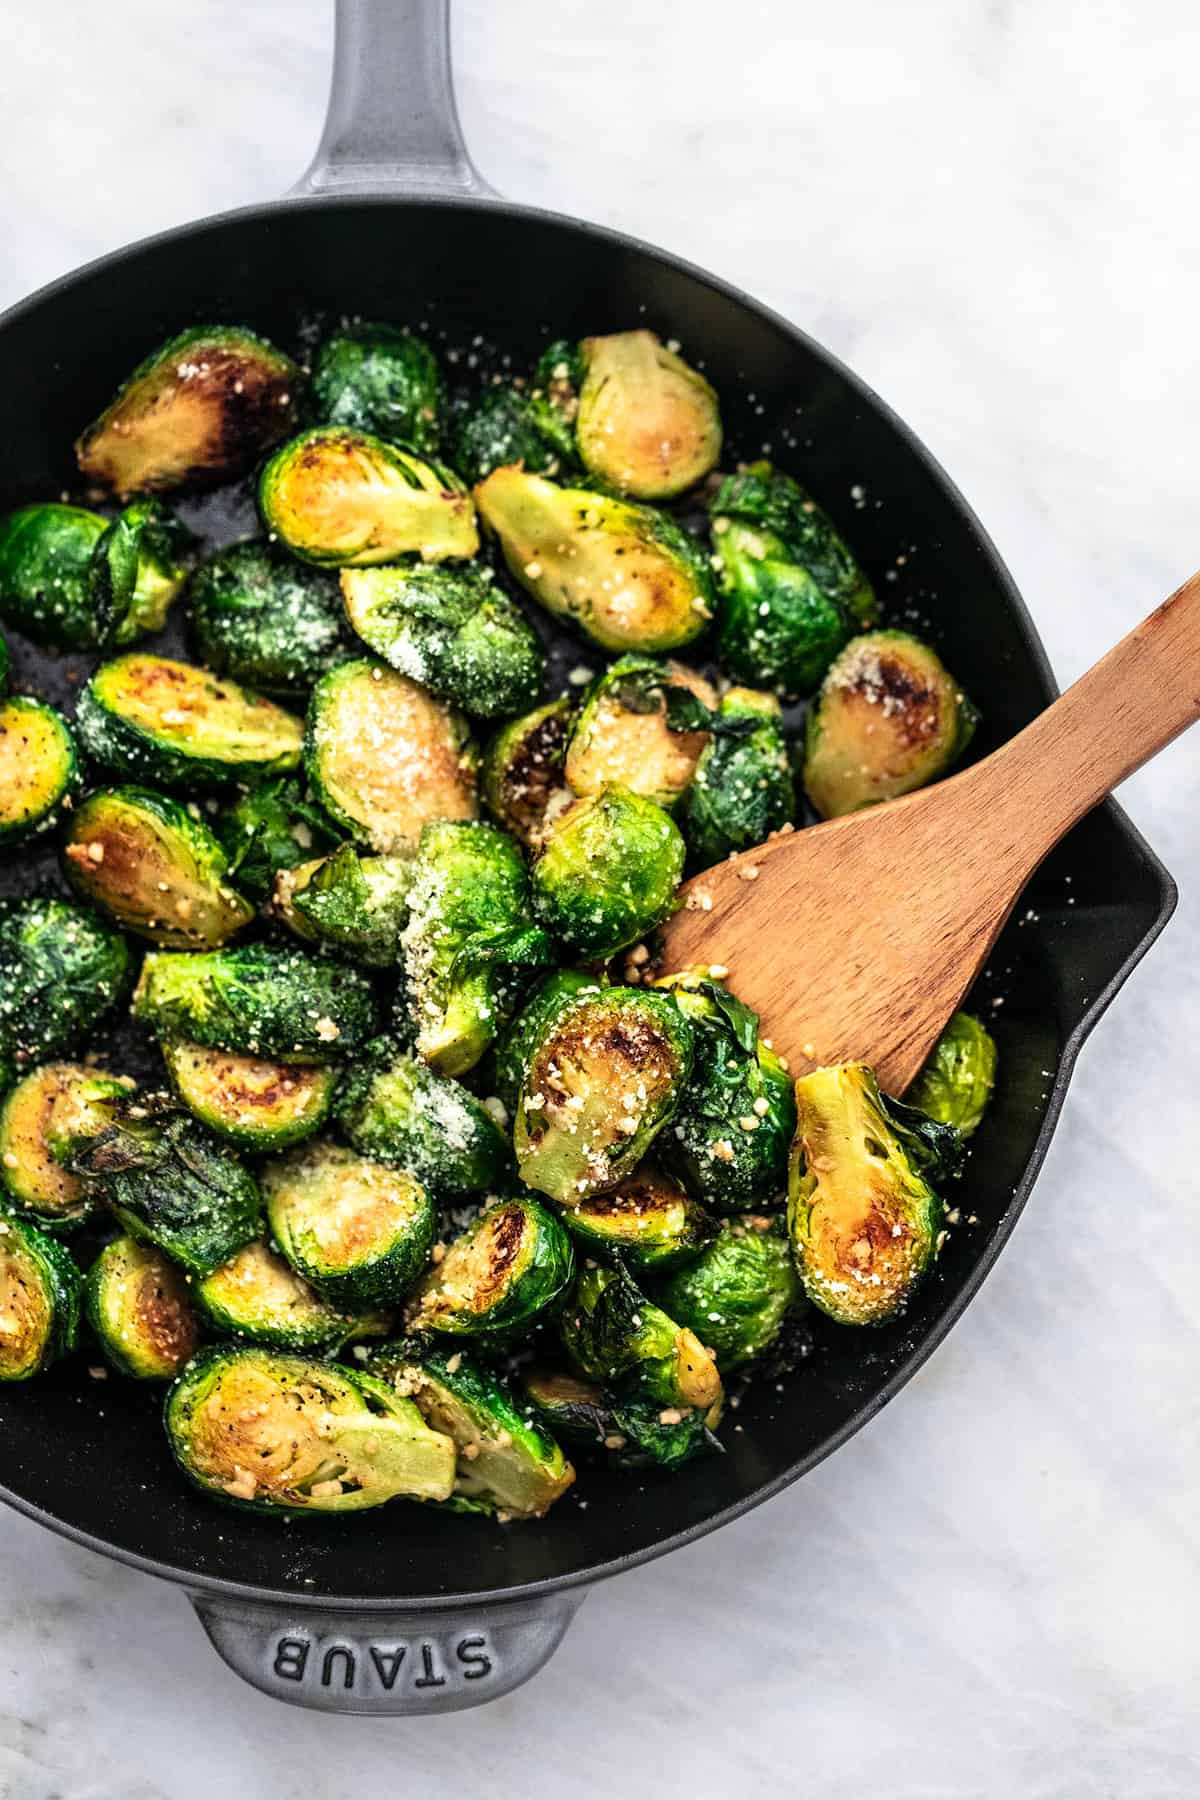 top view of sautéed brussels sprouts with a wooden spoon in a pan.